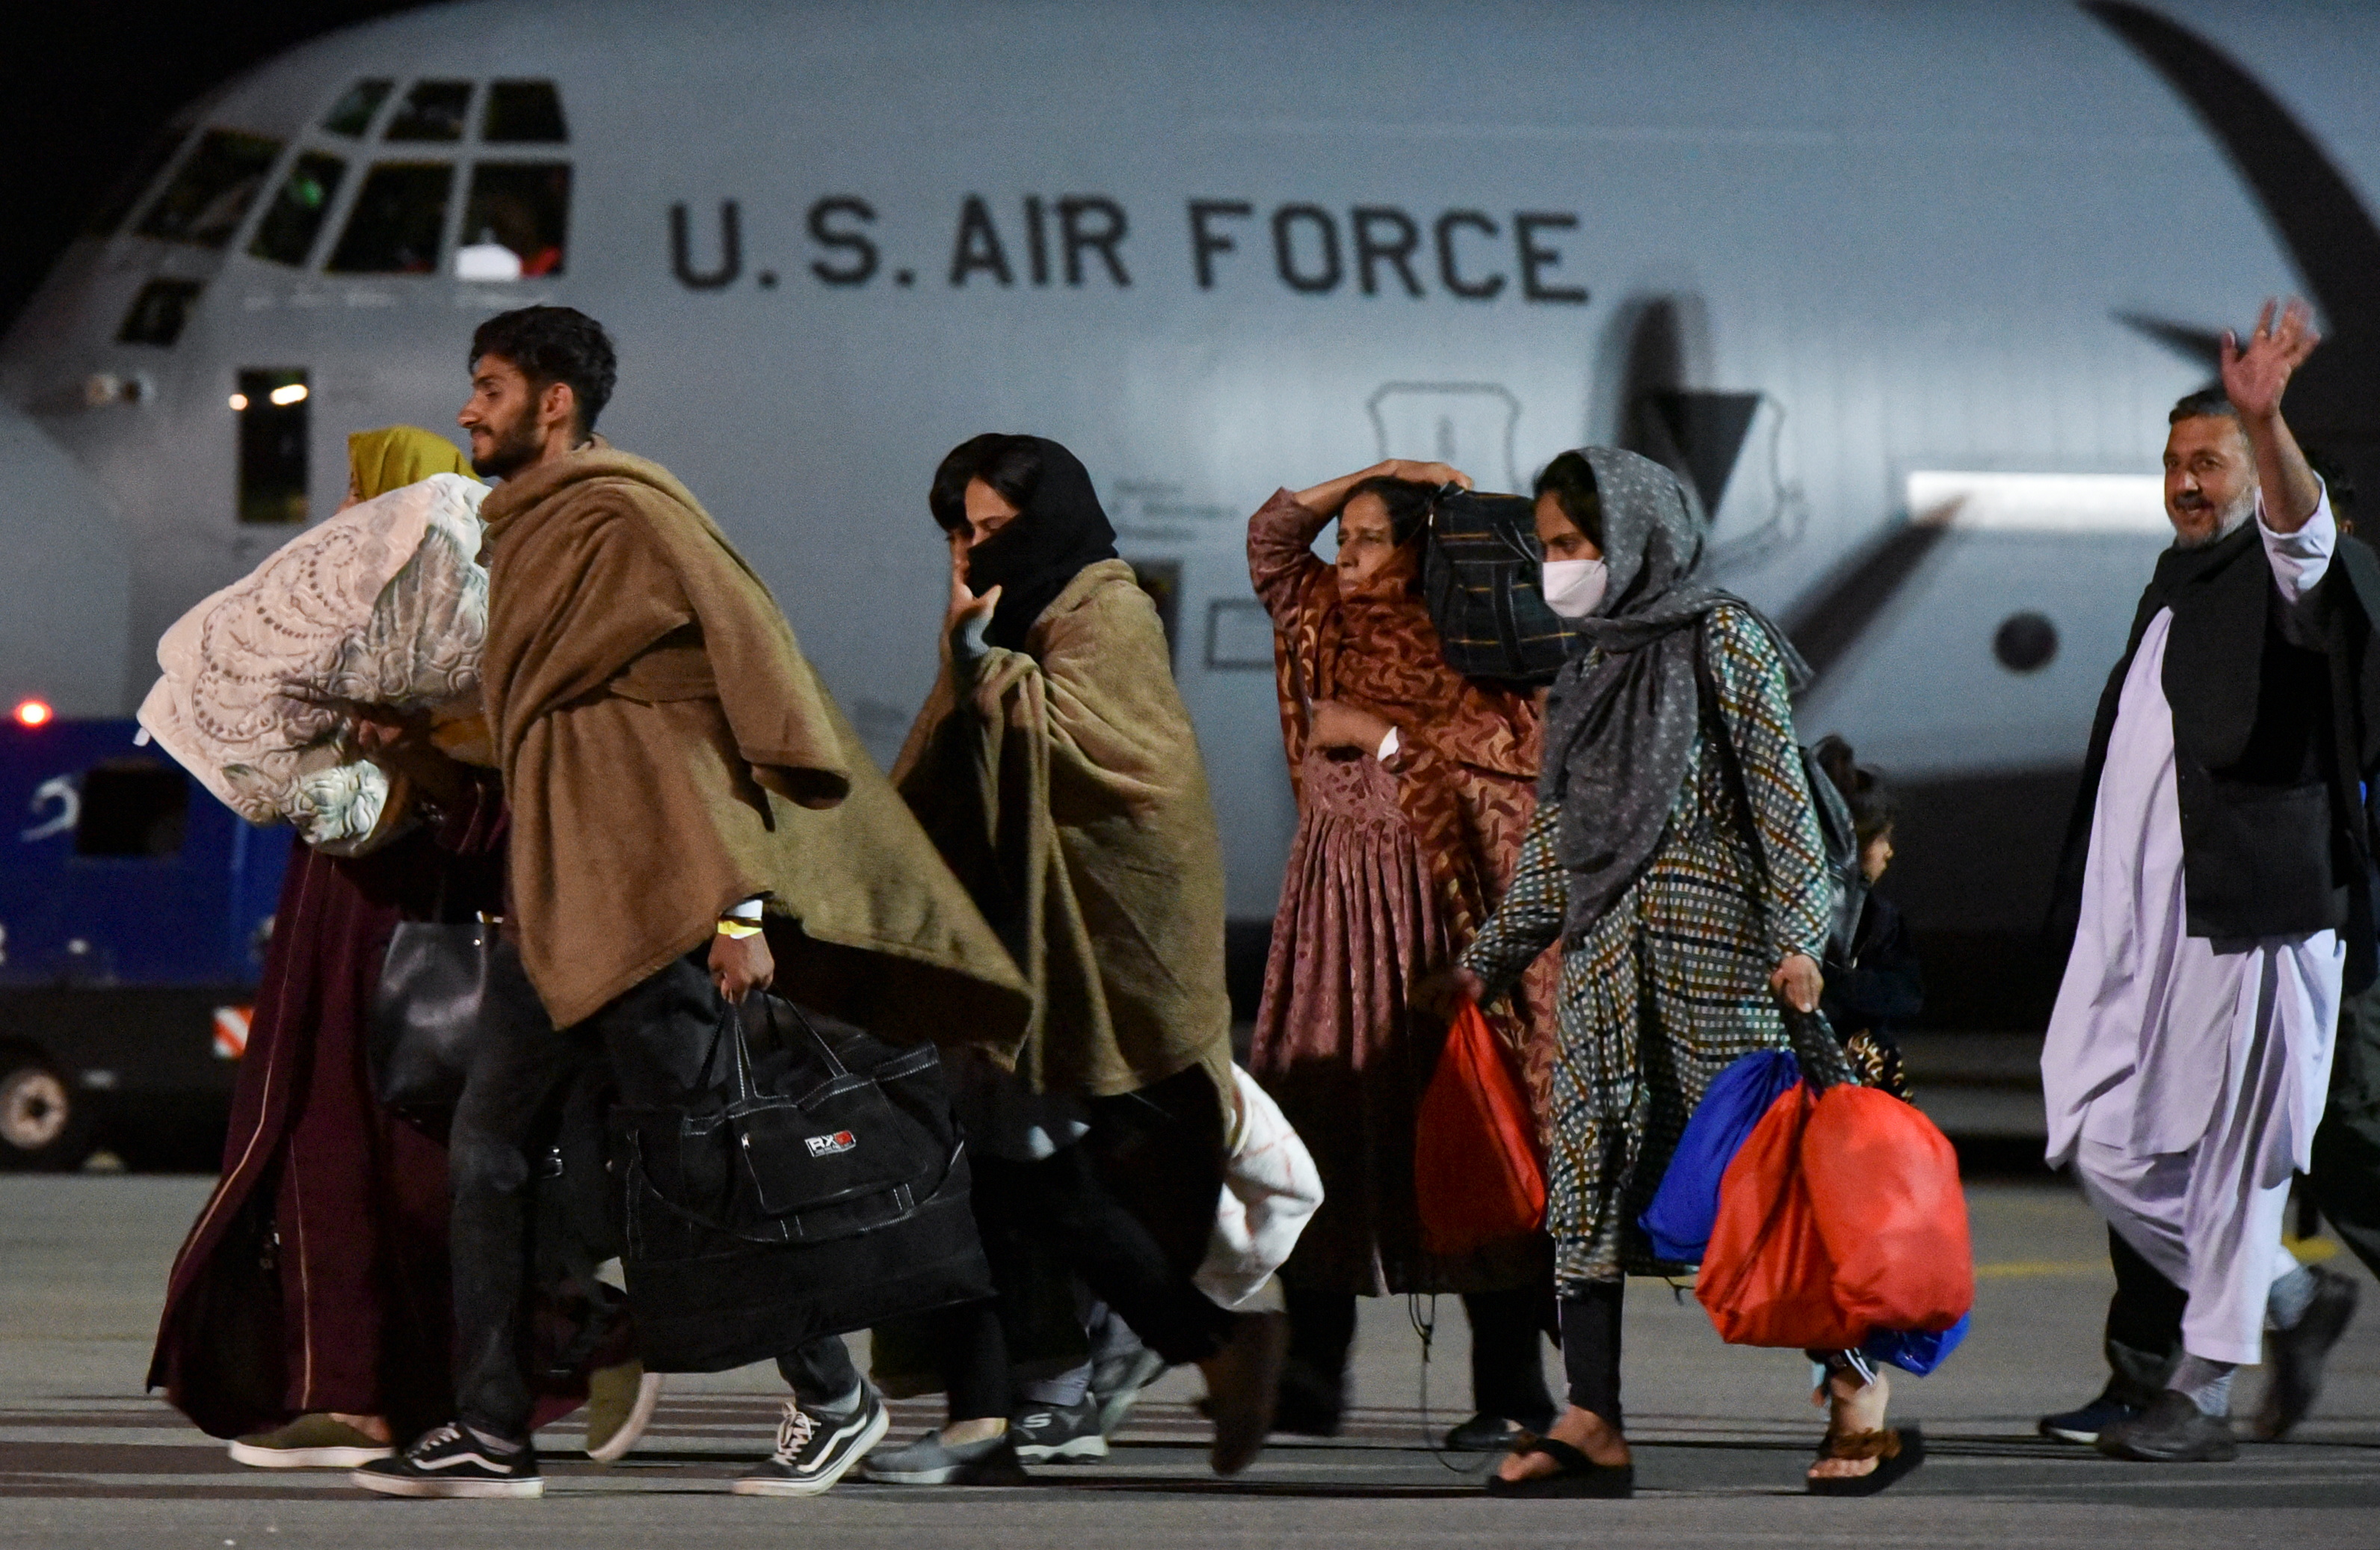 People who have been evacuated from Afghanistan arrive at Pristina International Airport in Pristina, Kosovo August 29, 2021, after Taliban insurgents entered Afghanistan's capital Kabul. REUTERS/Laura Hasani